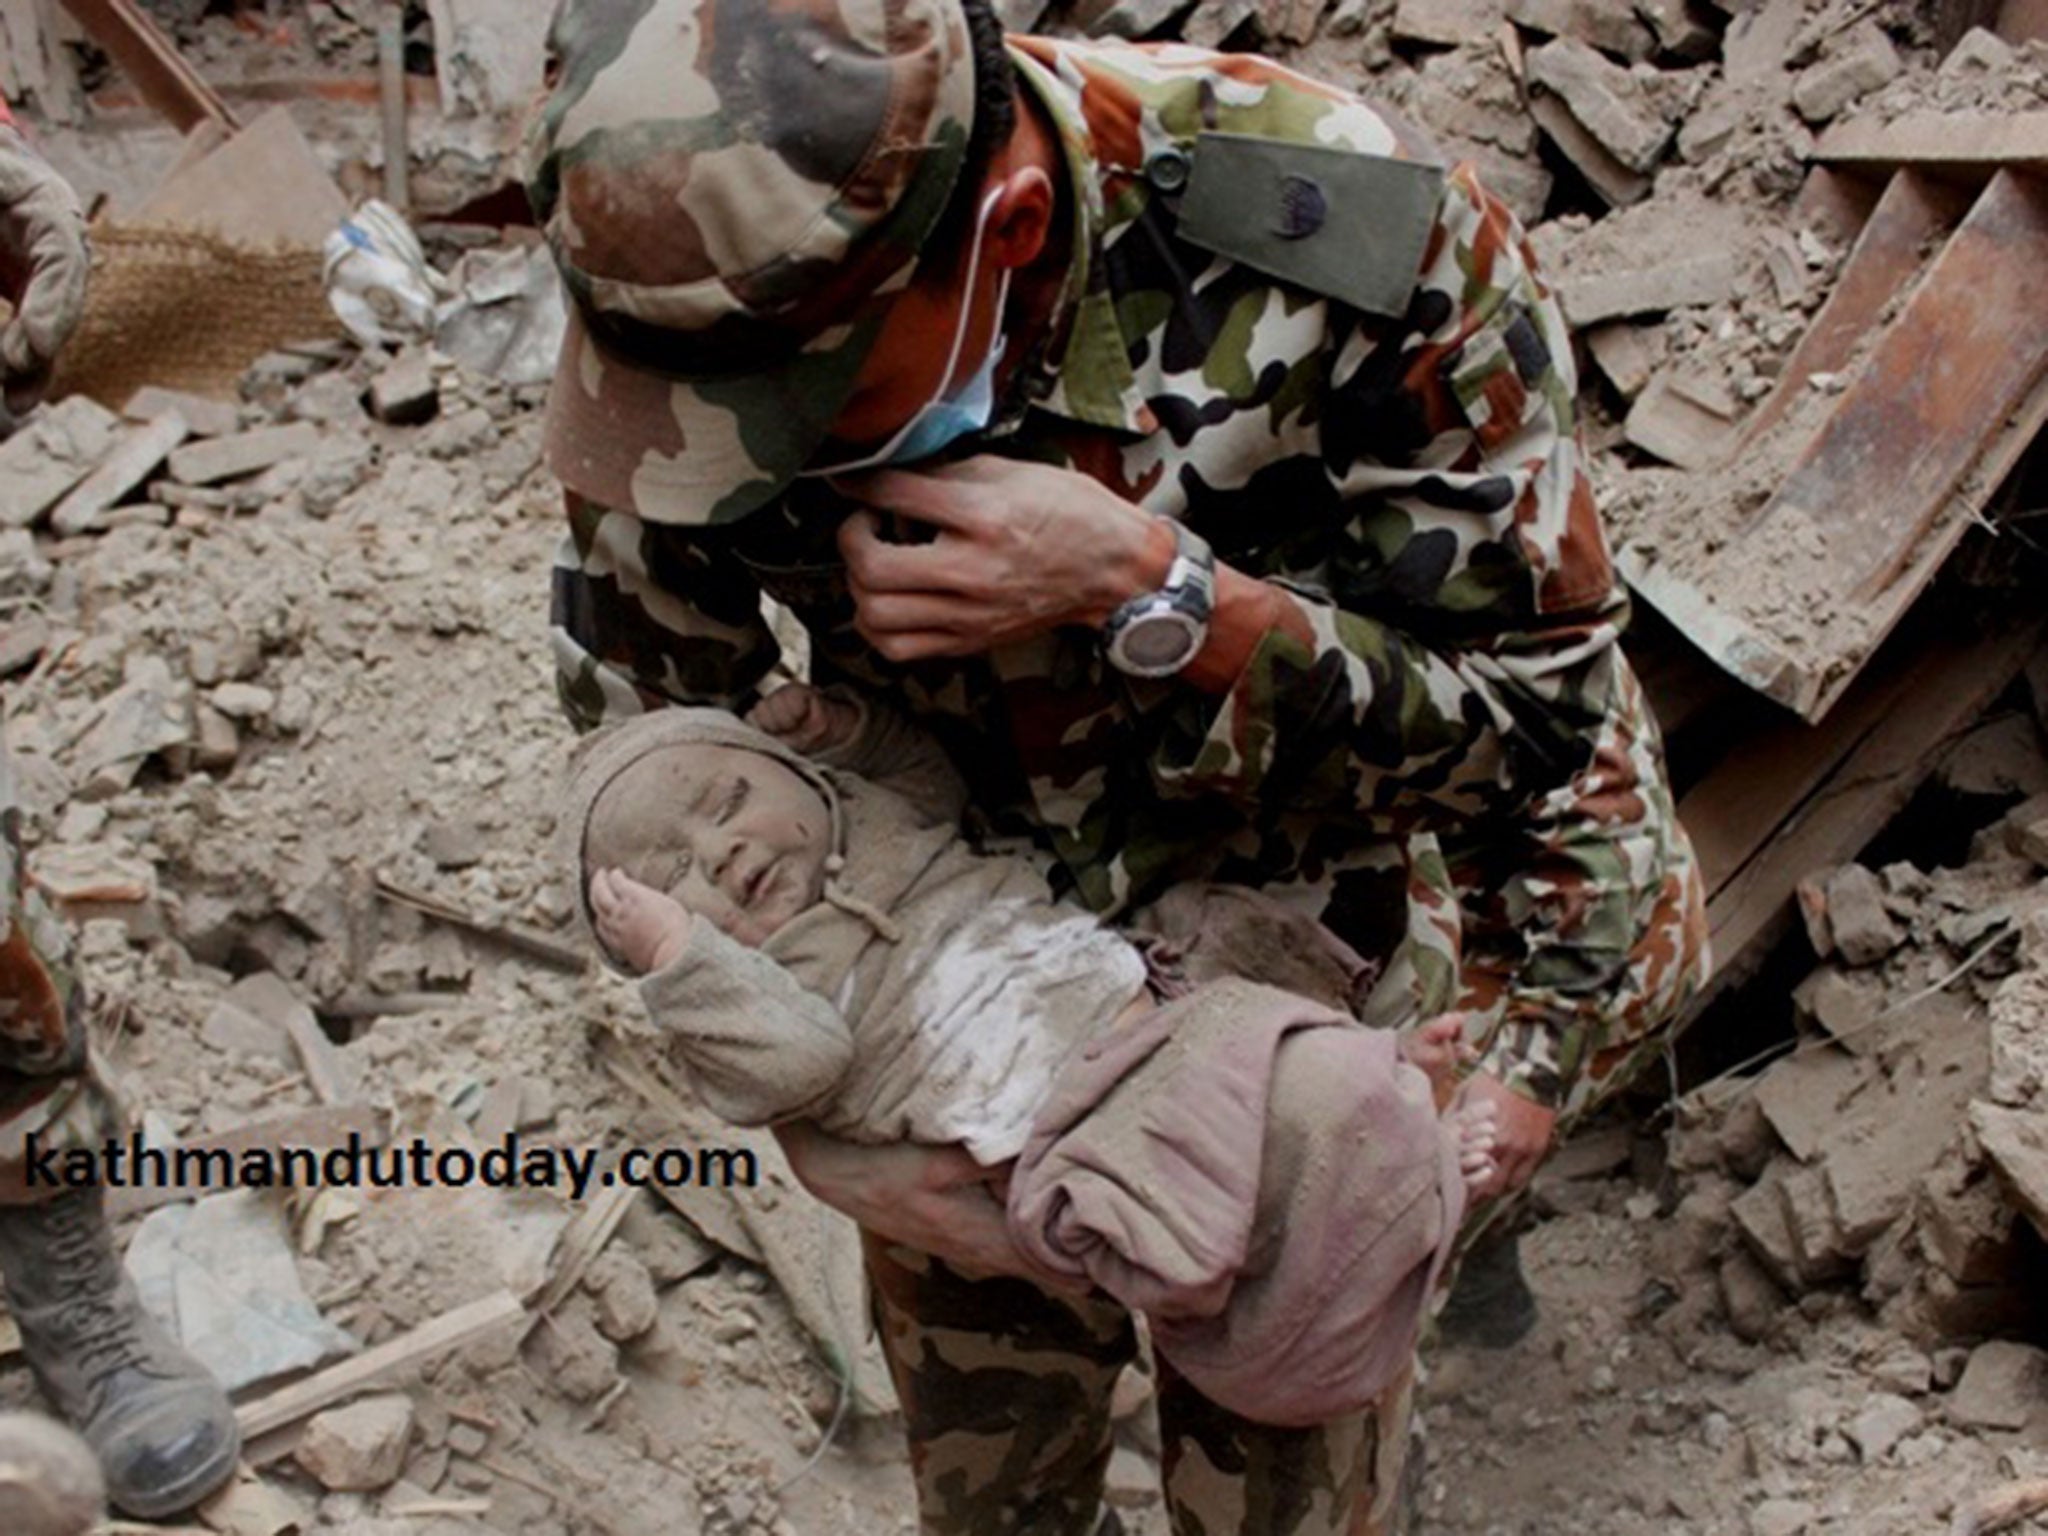 The baby boy was pulled from the wreckage by the Nepalese army 